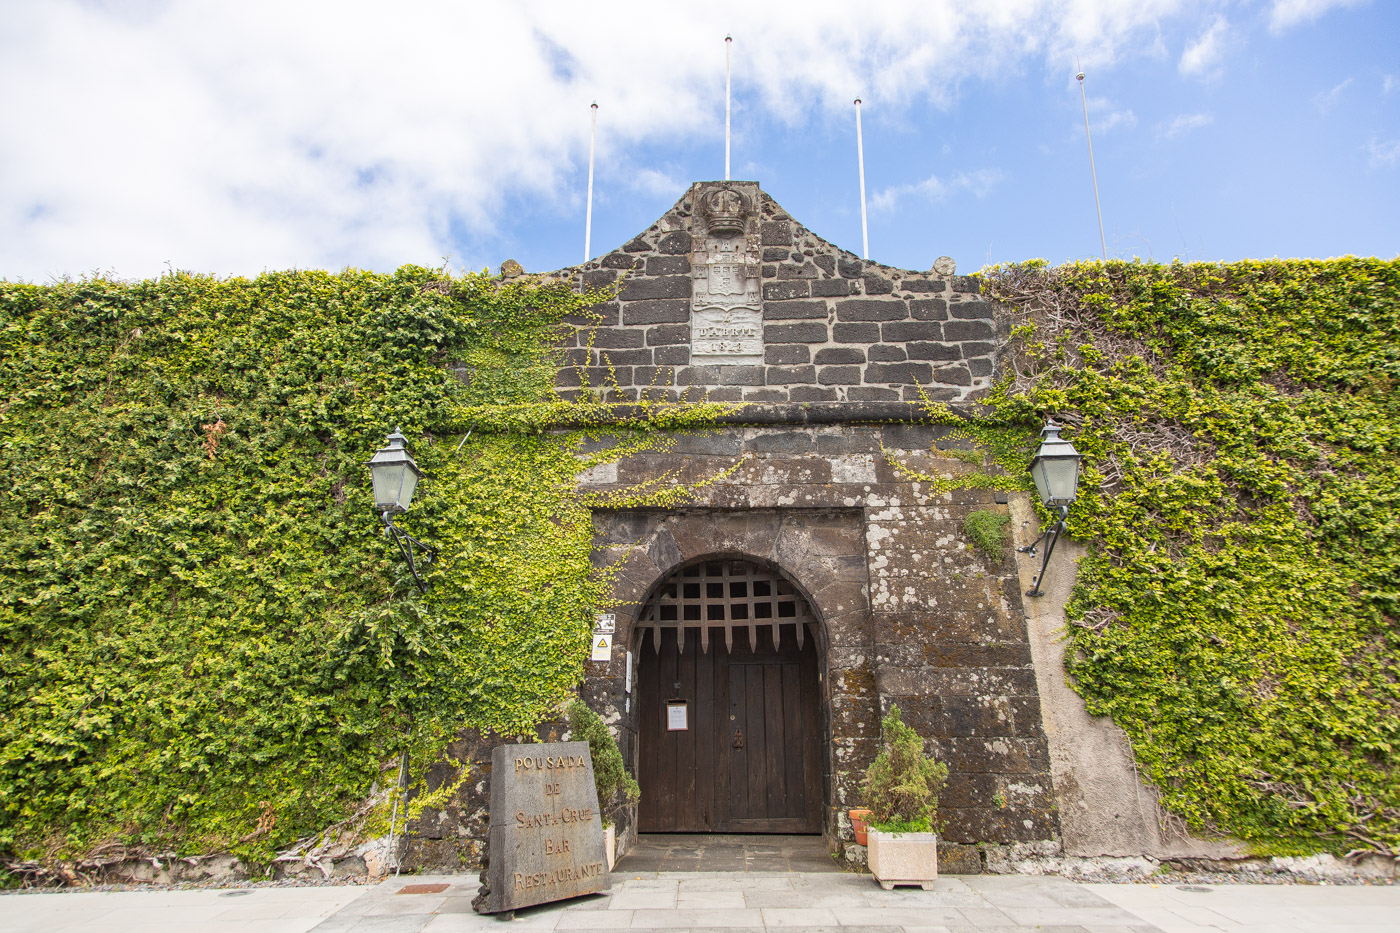 What to visit in Faial Azores